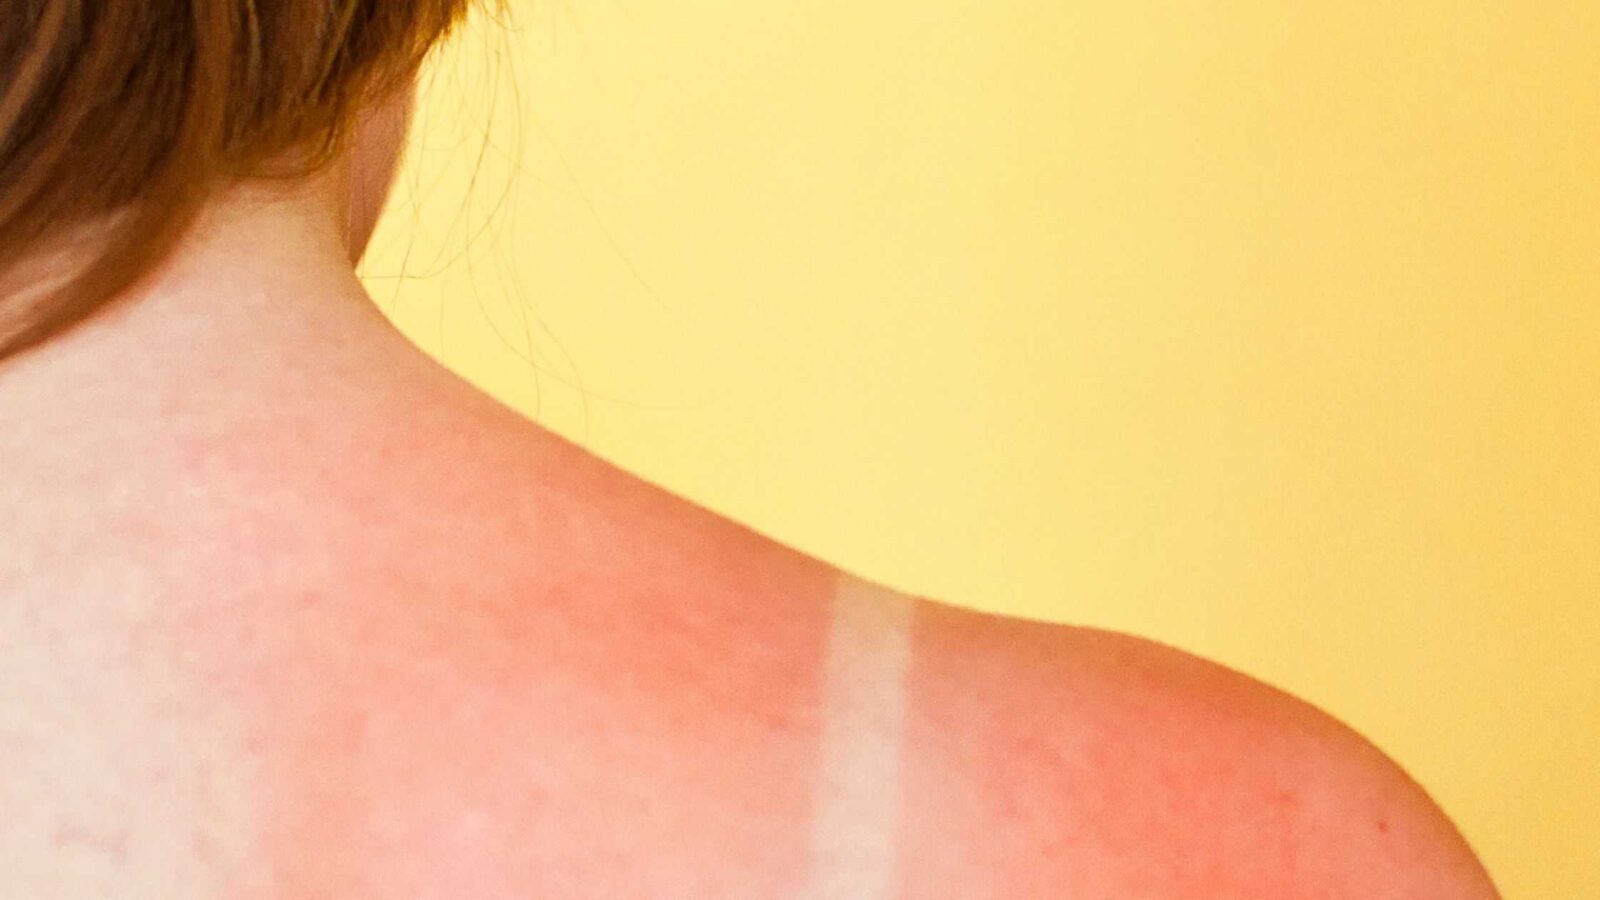 11 Tips If You’re Still Getting Sunburned After Applying Sunscreen